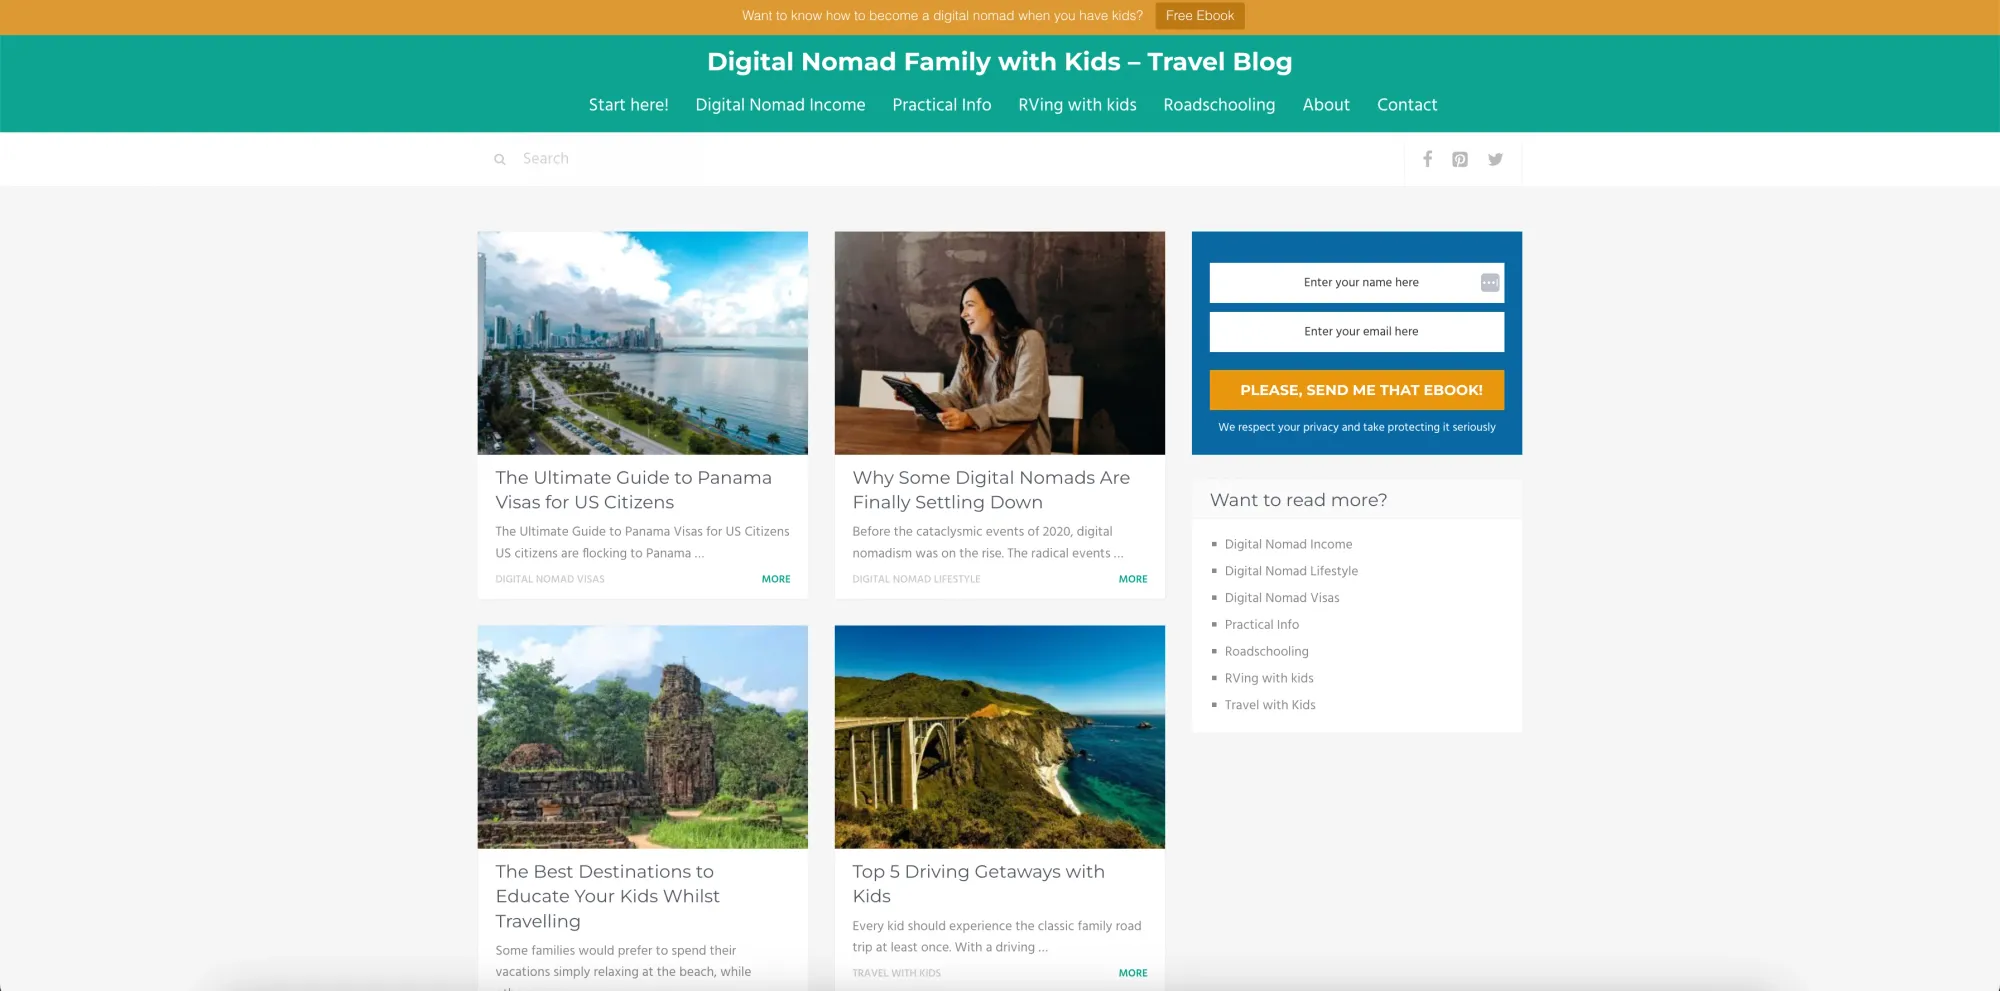 digital nomad family with kids, a digital nomad family blog